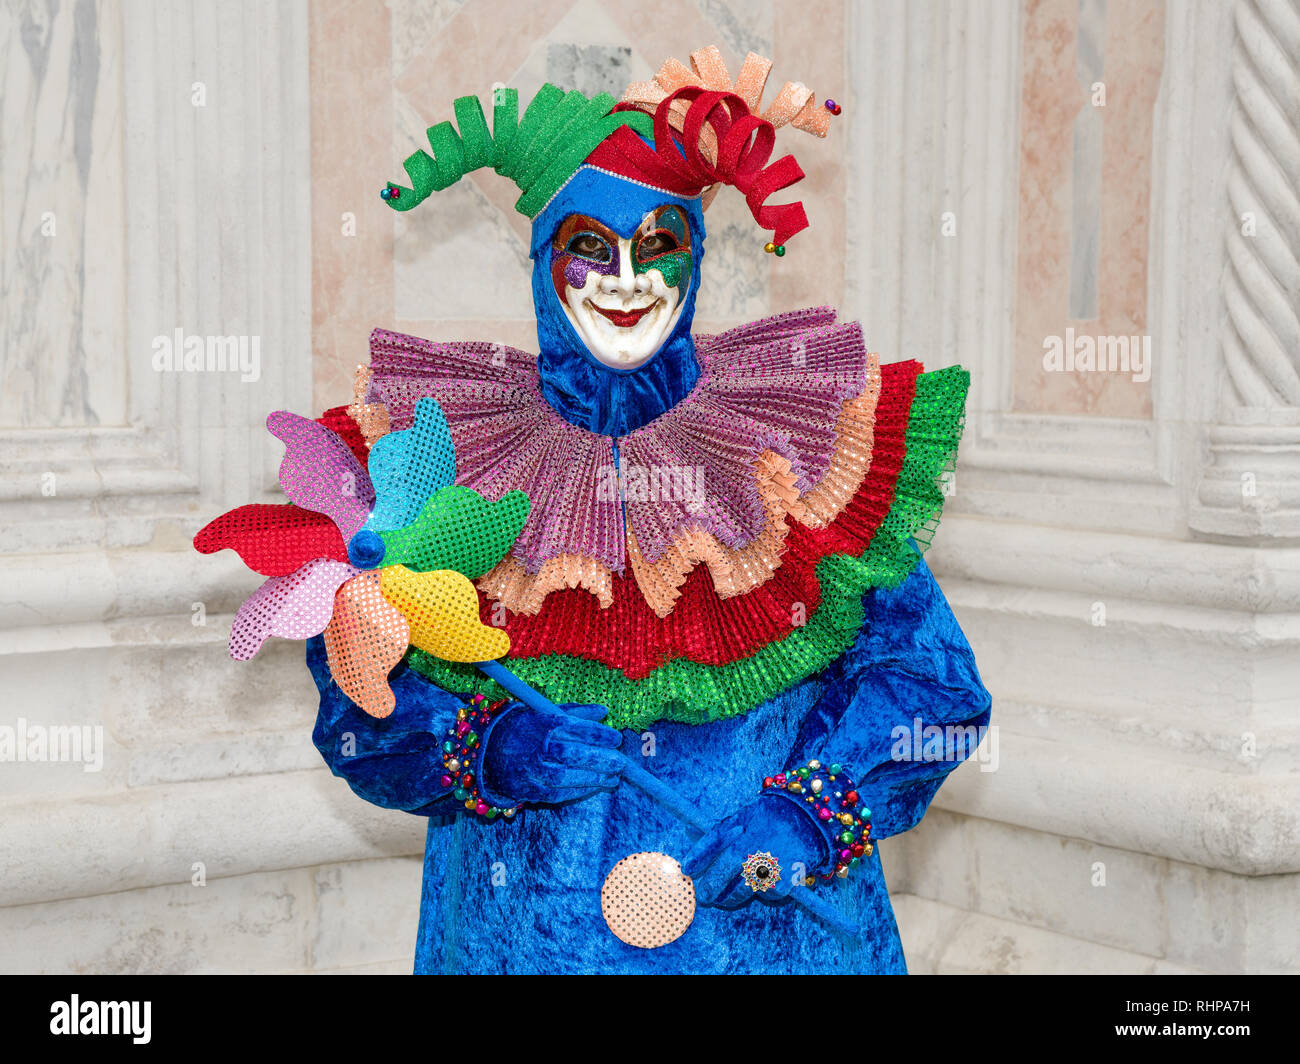 The Carnival of Venice is an annual festival held in Venice, Veneto, Italy.  The Carnival ends with the Christian celebration of Lent, forty days before  Easter, on Shrove Tuesday, the day before